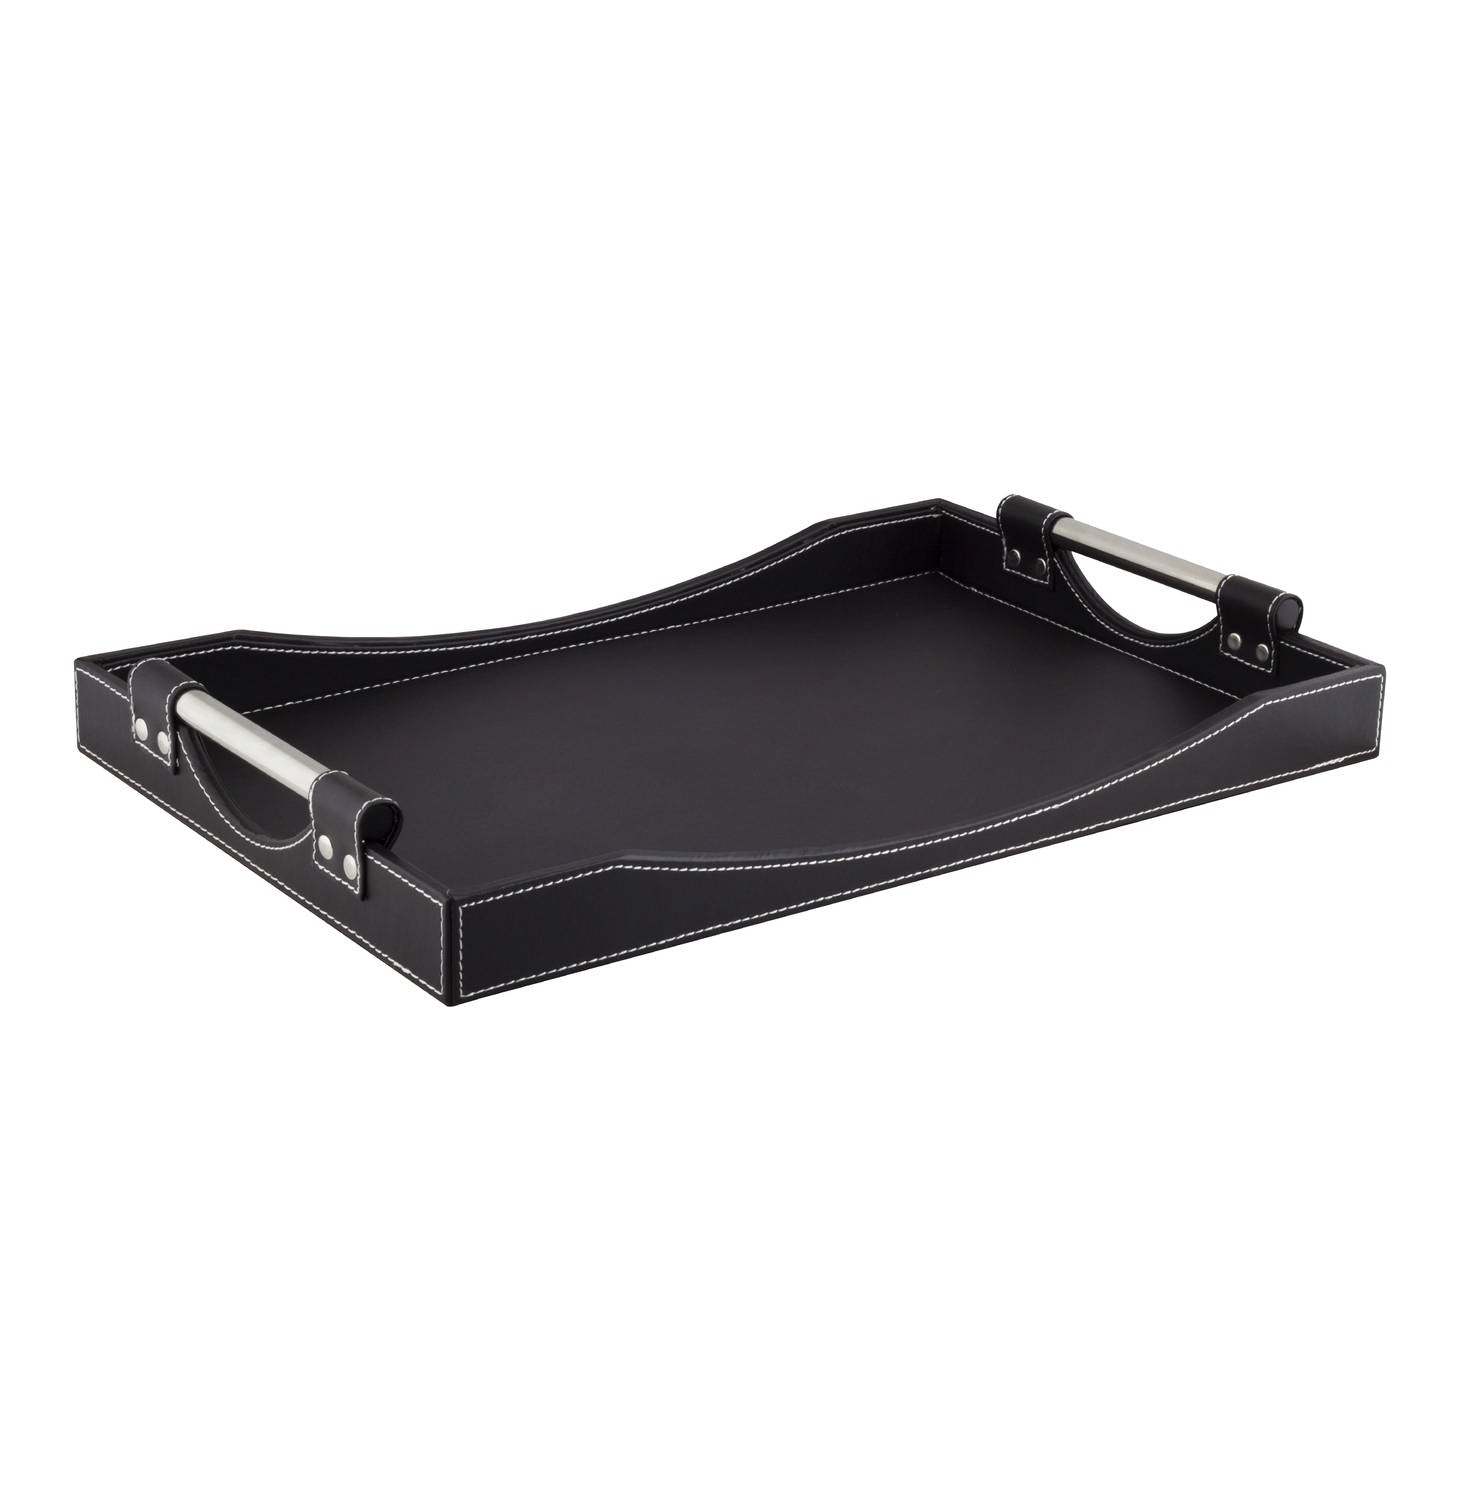 Leather Bound and Stainless Steel Handle Serving Tray